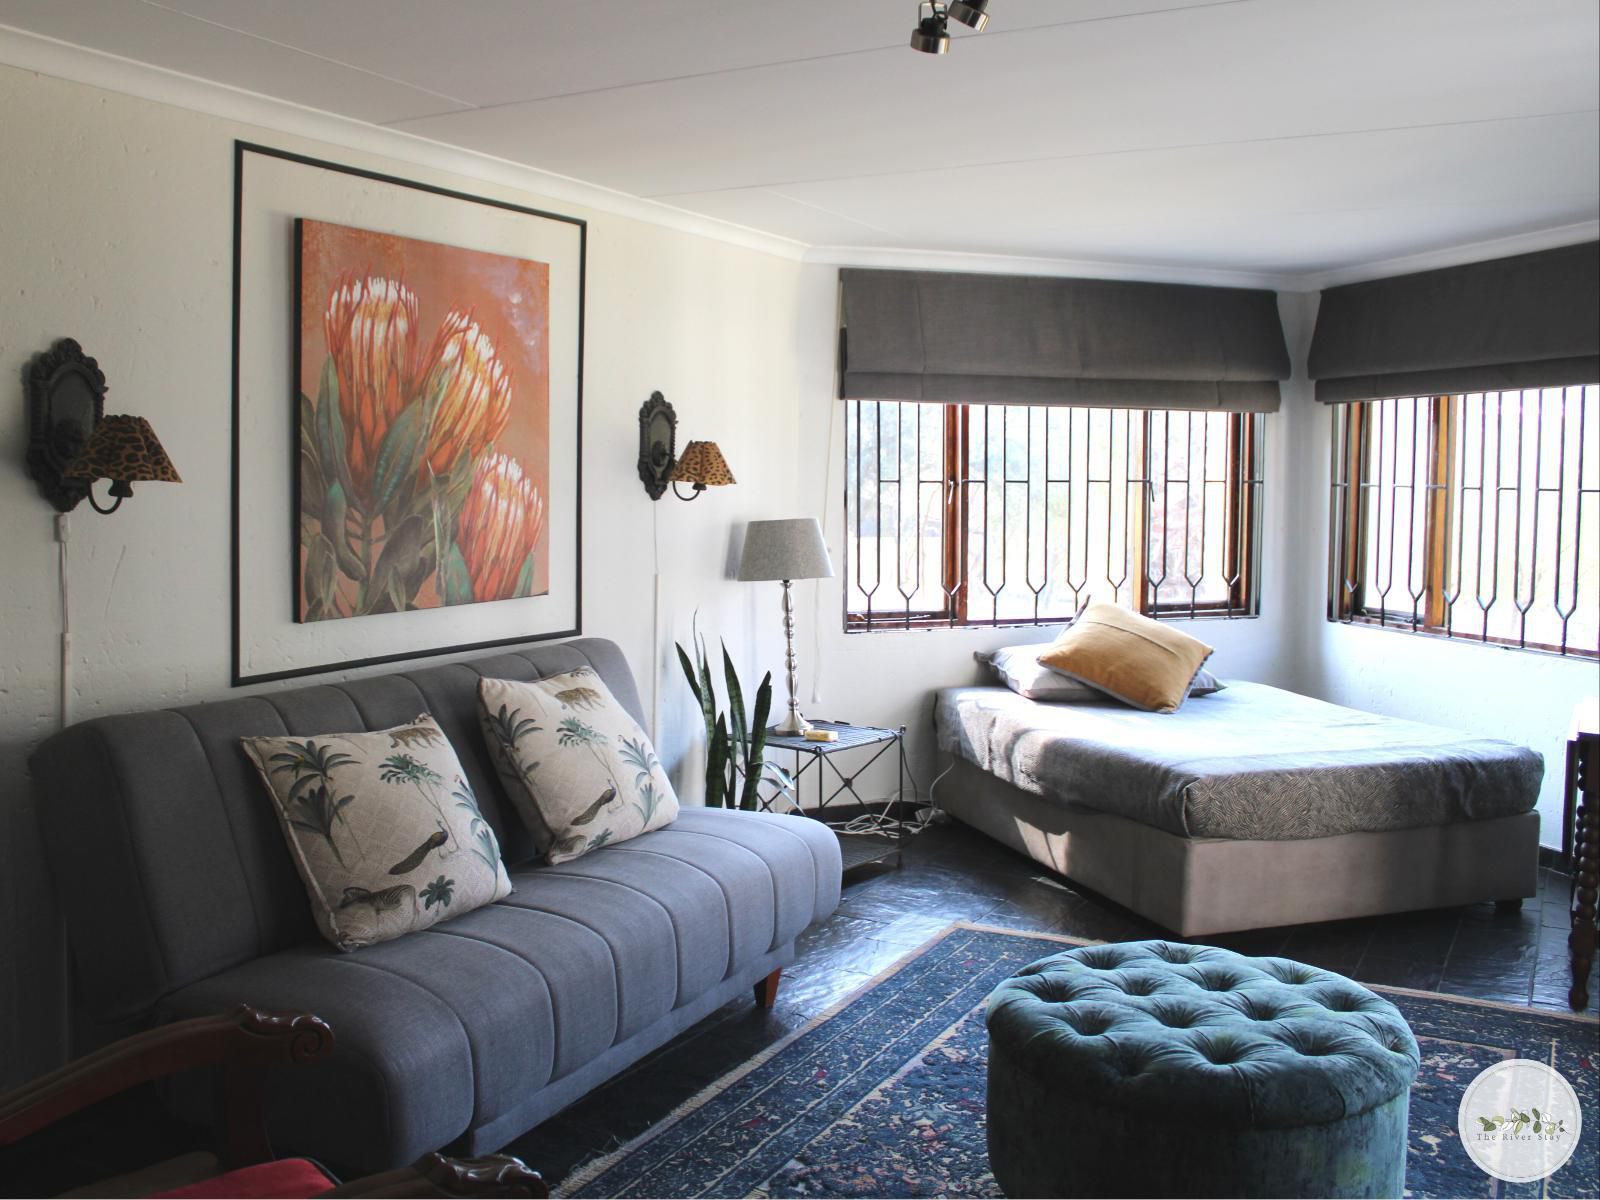 The River Cottage And Mainhouse At Woodlands Muldersdrift Gauteng South Africa Bedroom